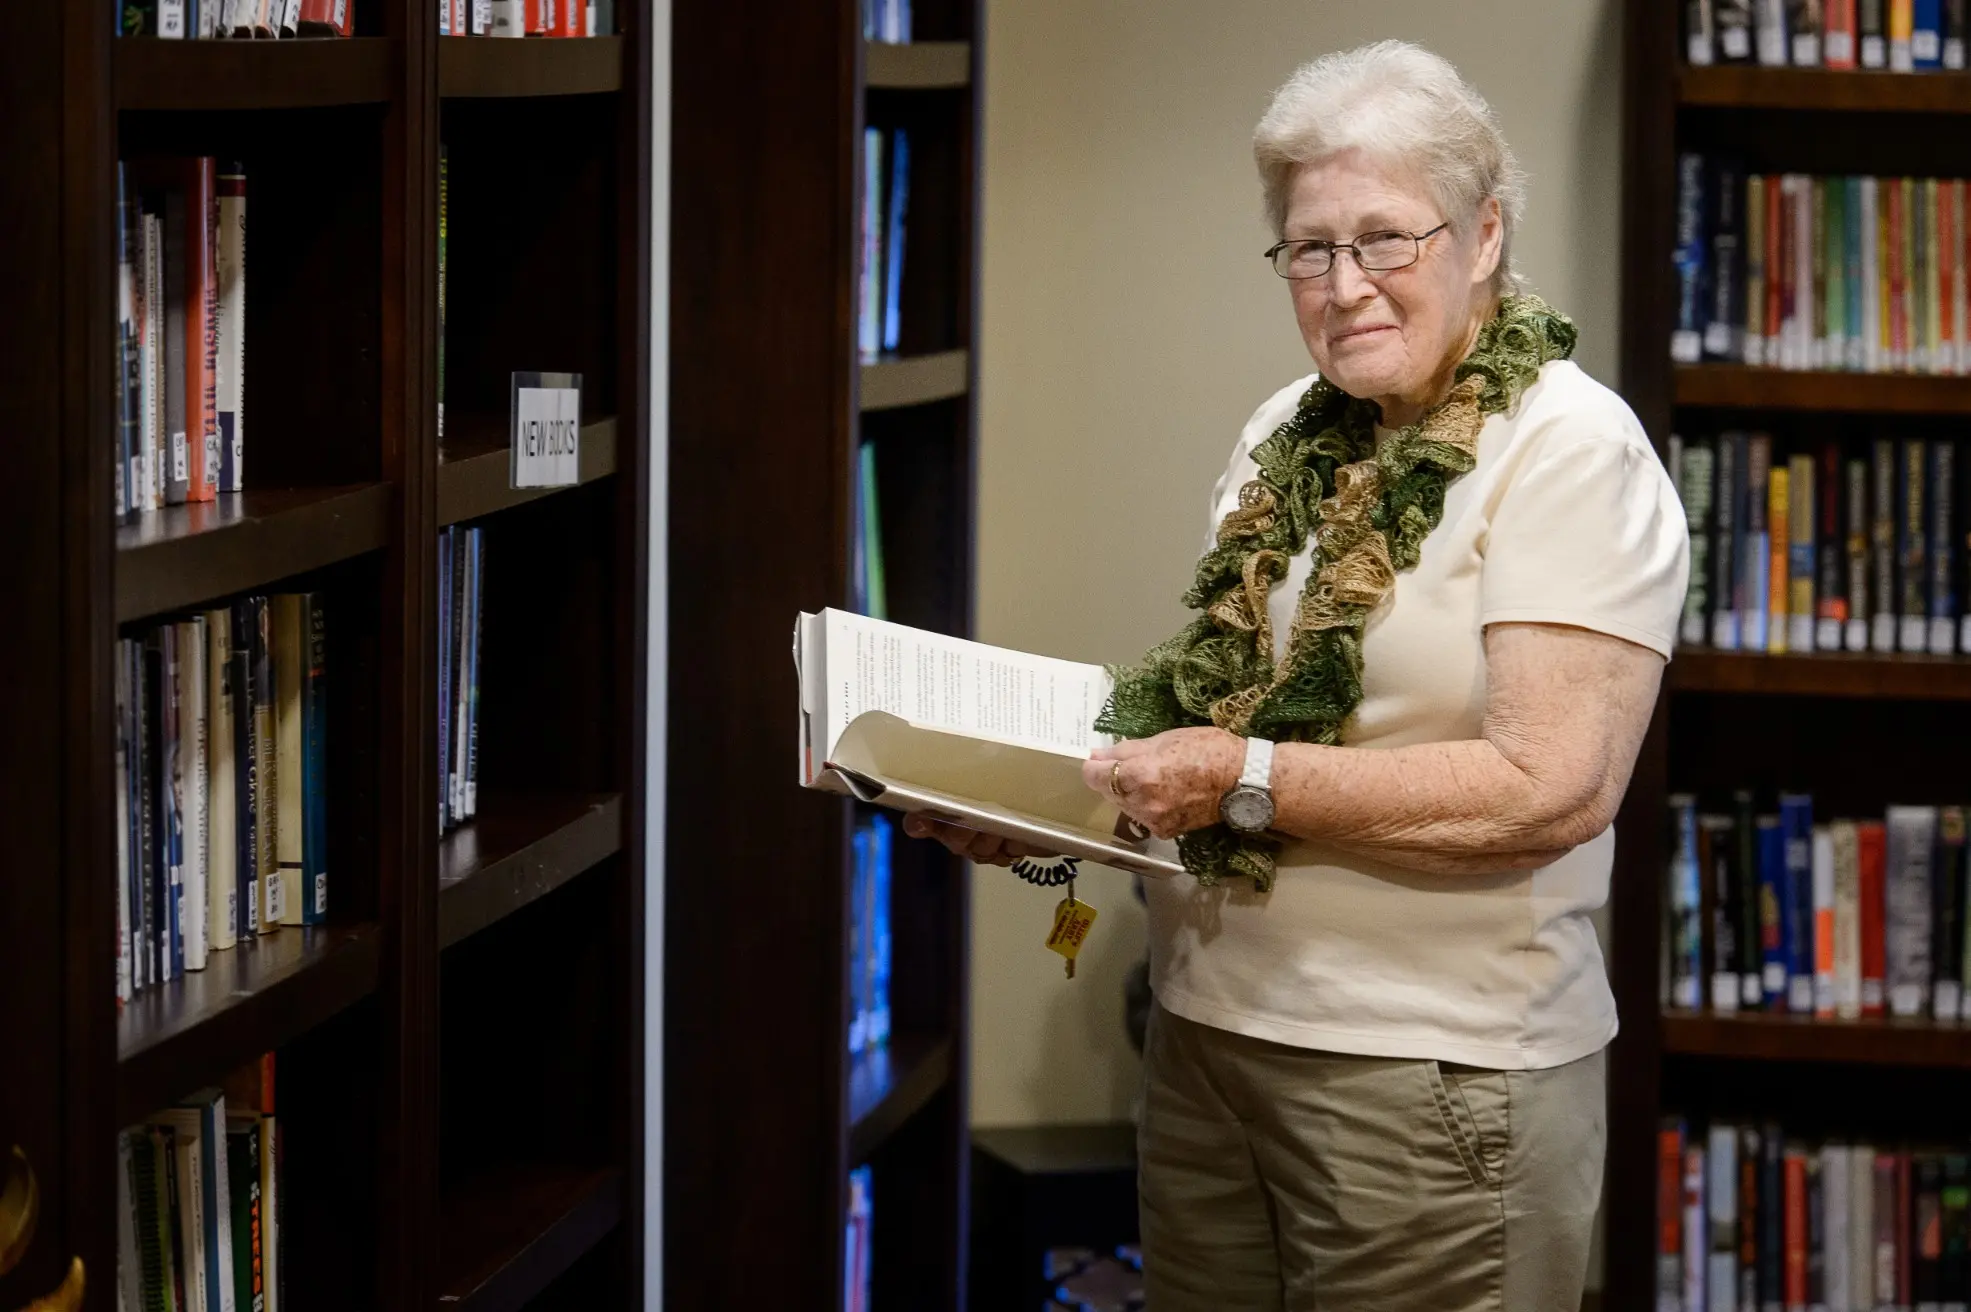 Senior in the library of a retirement community in Niceville, FL